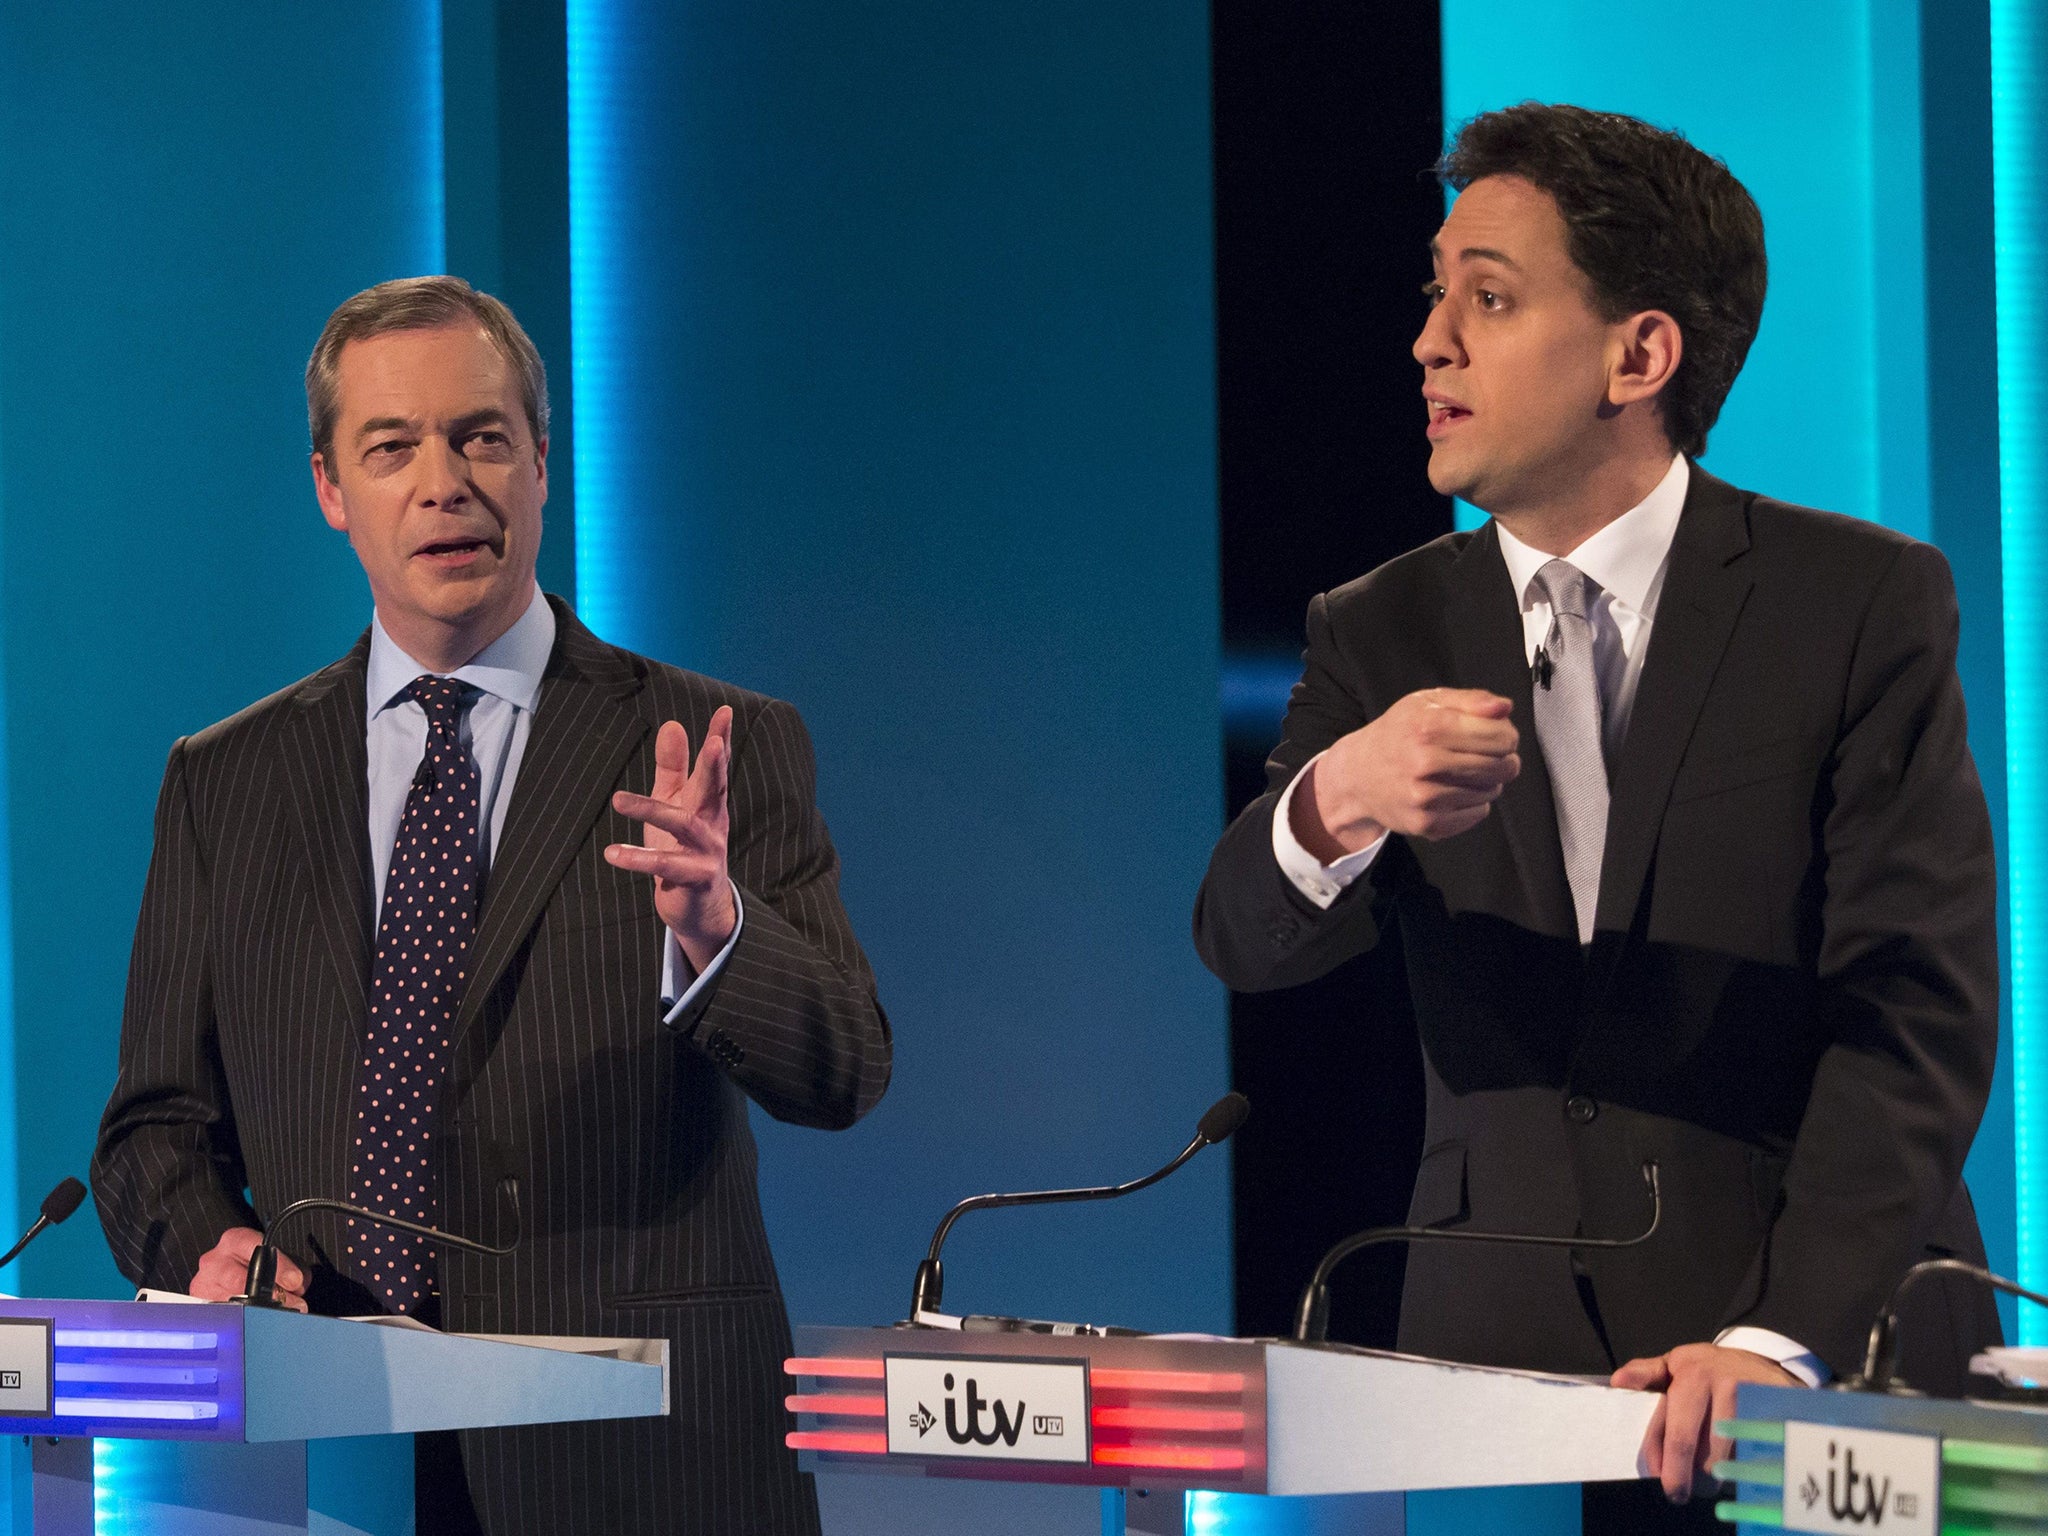 Nigel Farage went on the offensive, saying the six other leaders were “all the same”